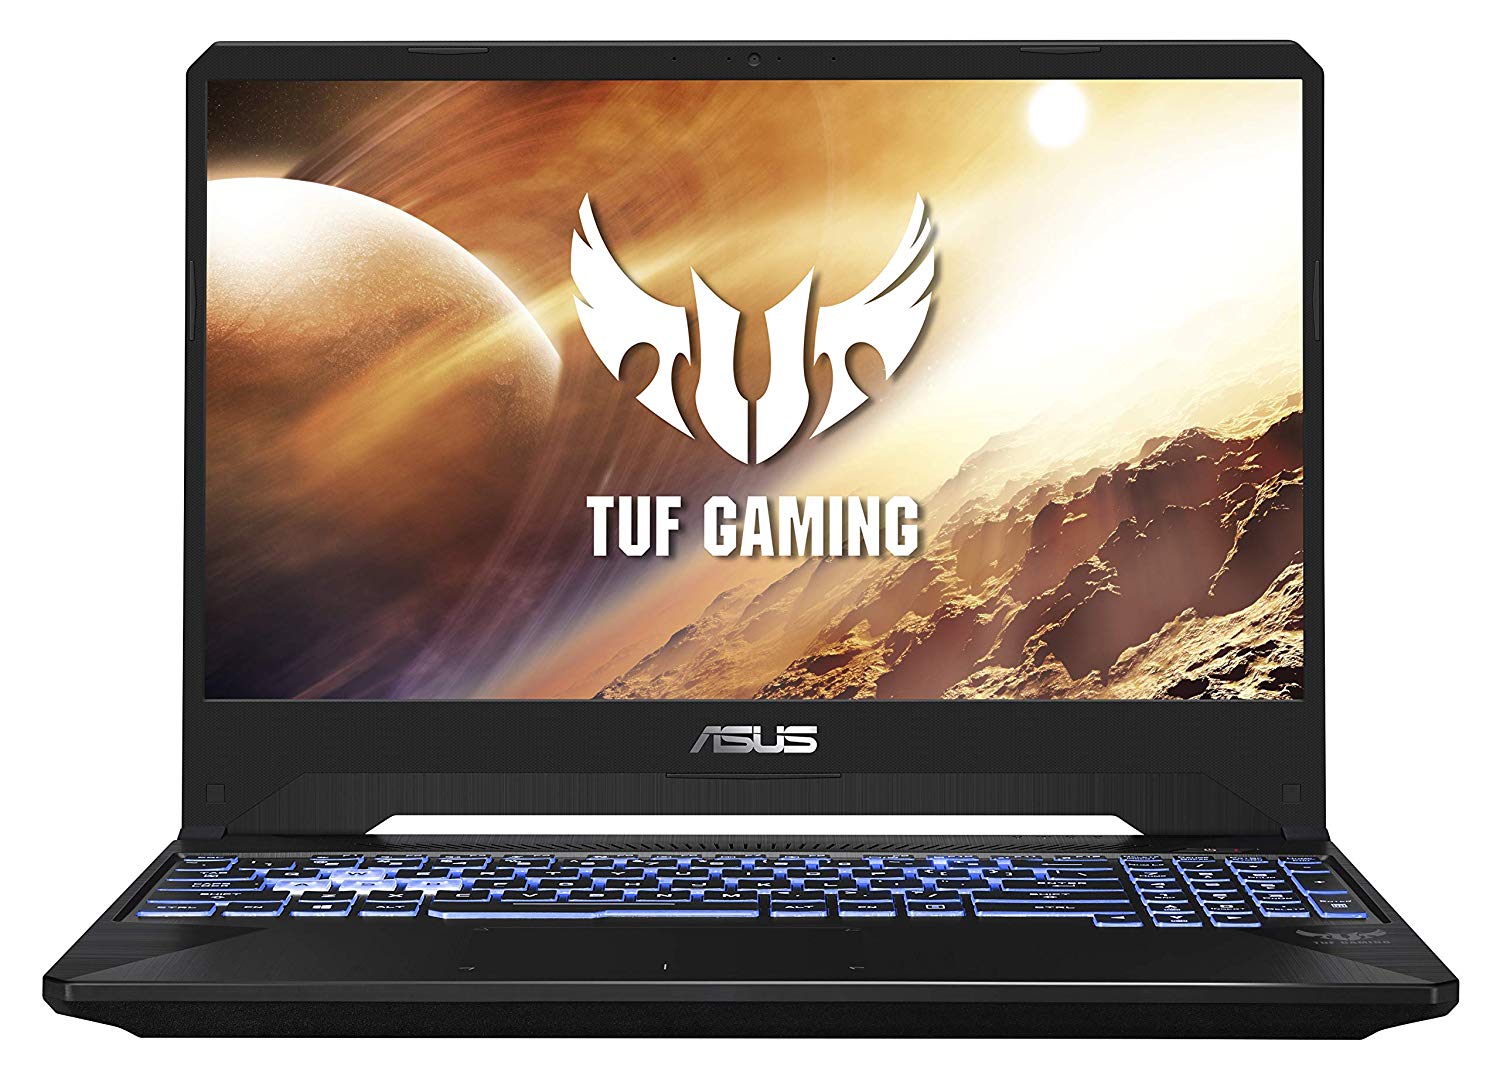 Top 6 Best Laptops Under 50000 For Gaming In India (2020) Laptop